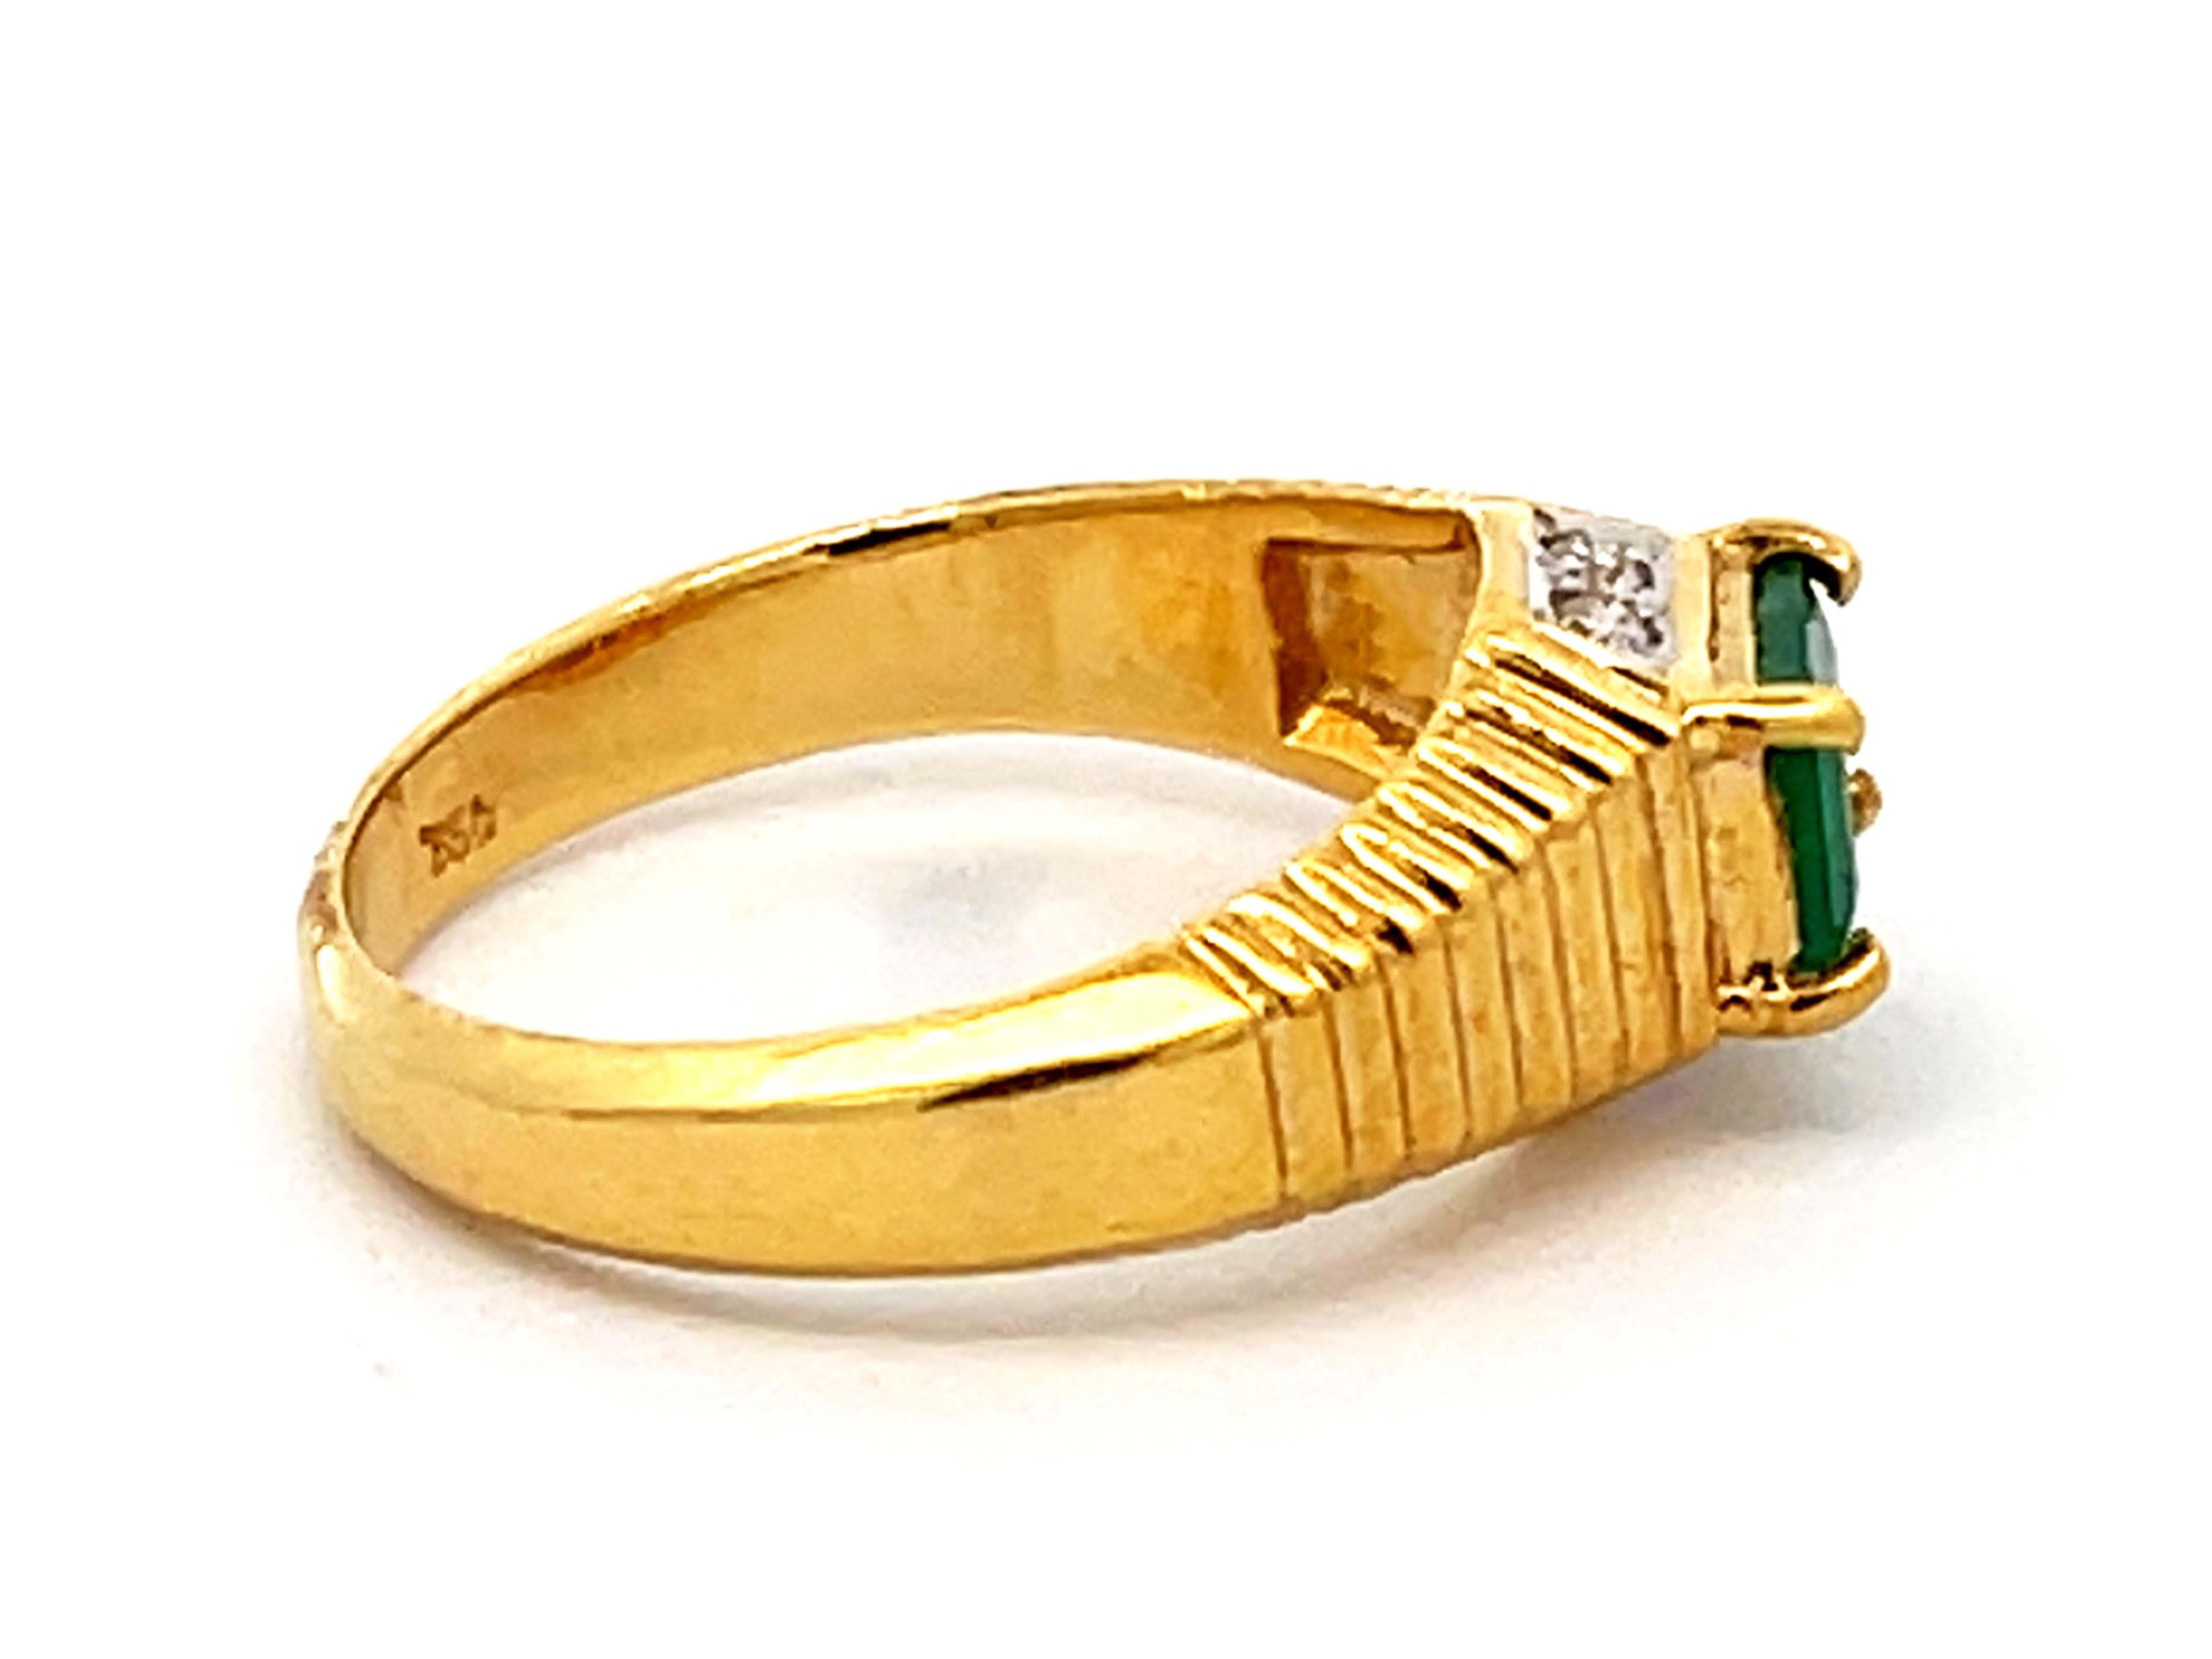 Vintage Green Emerald and Diamond Band Ring in 18k Yellow Gold In Excellent Condition For Sale In Honolulu, HI